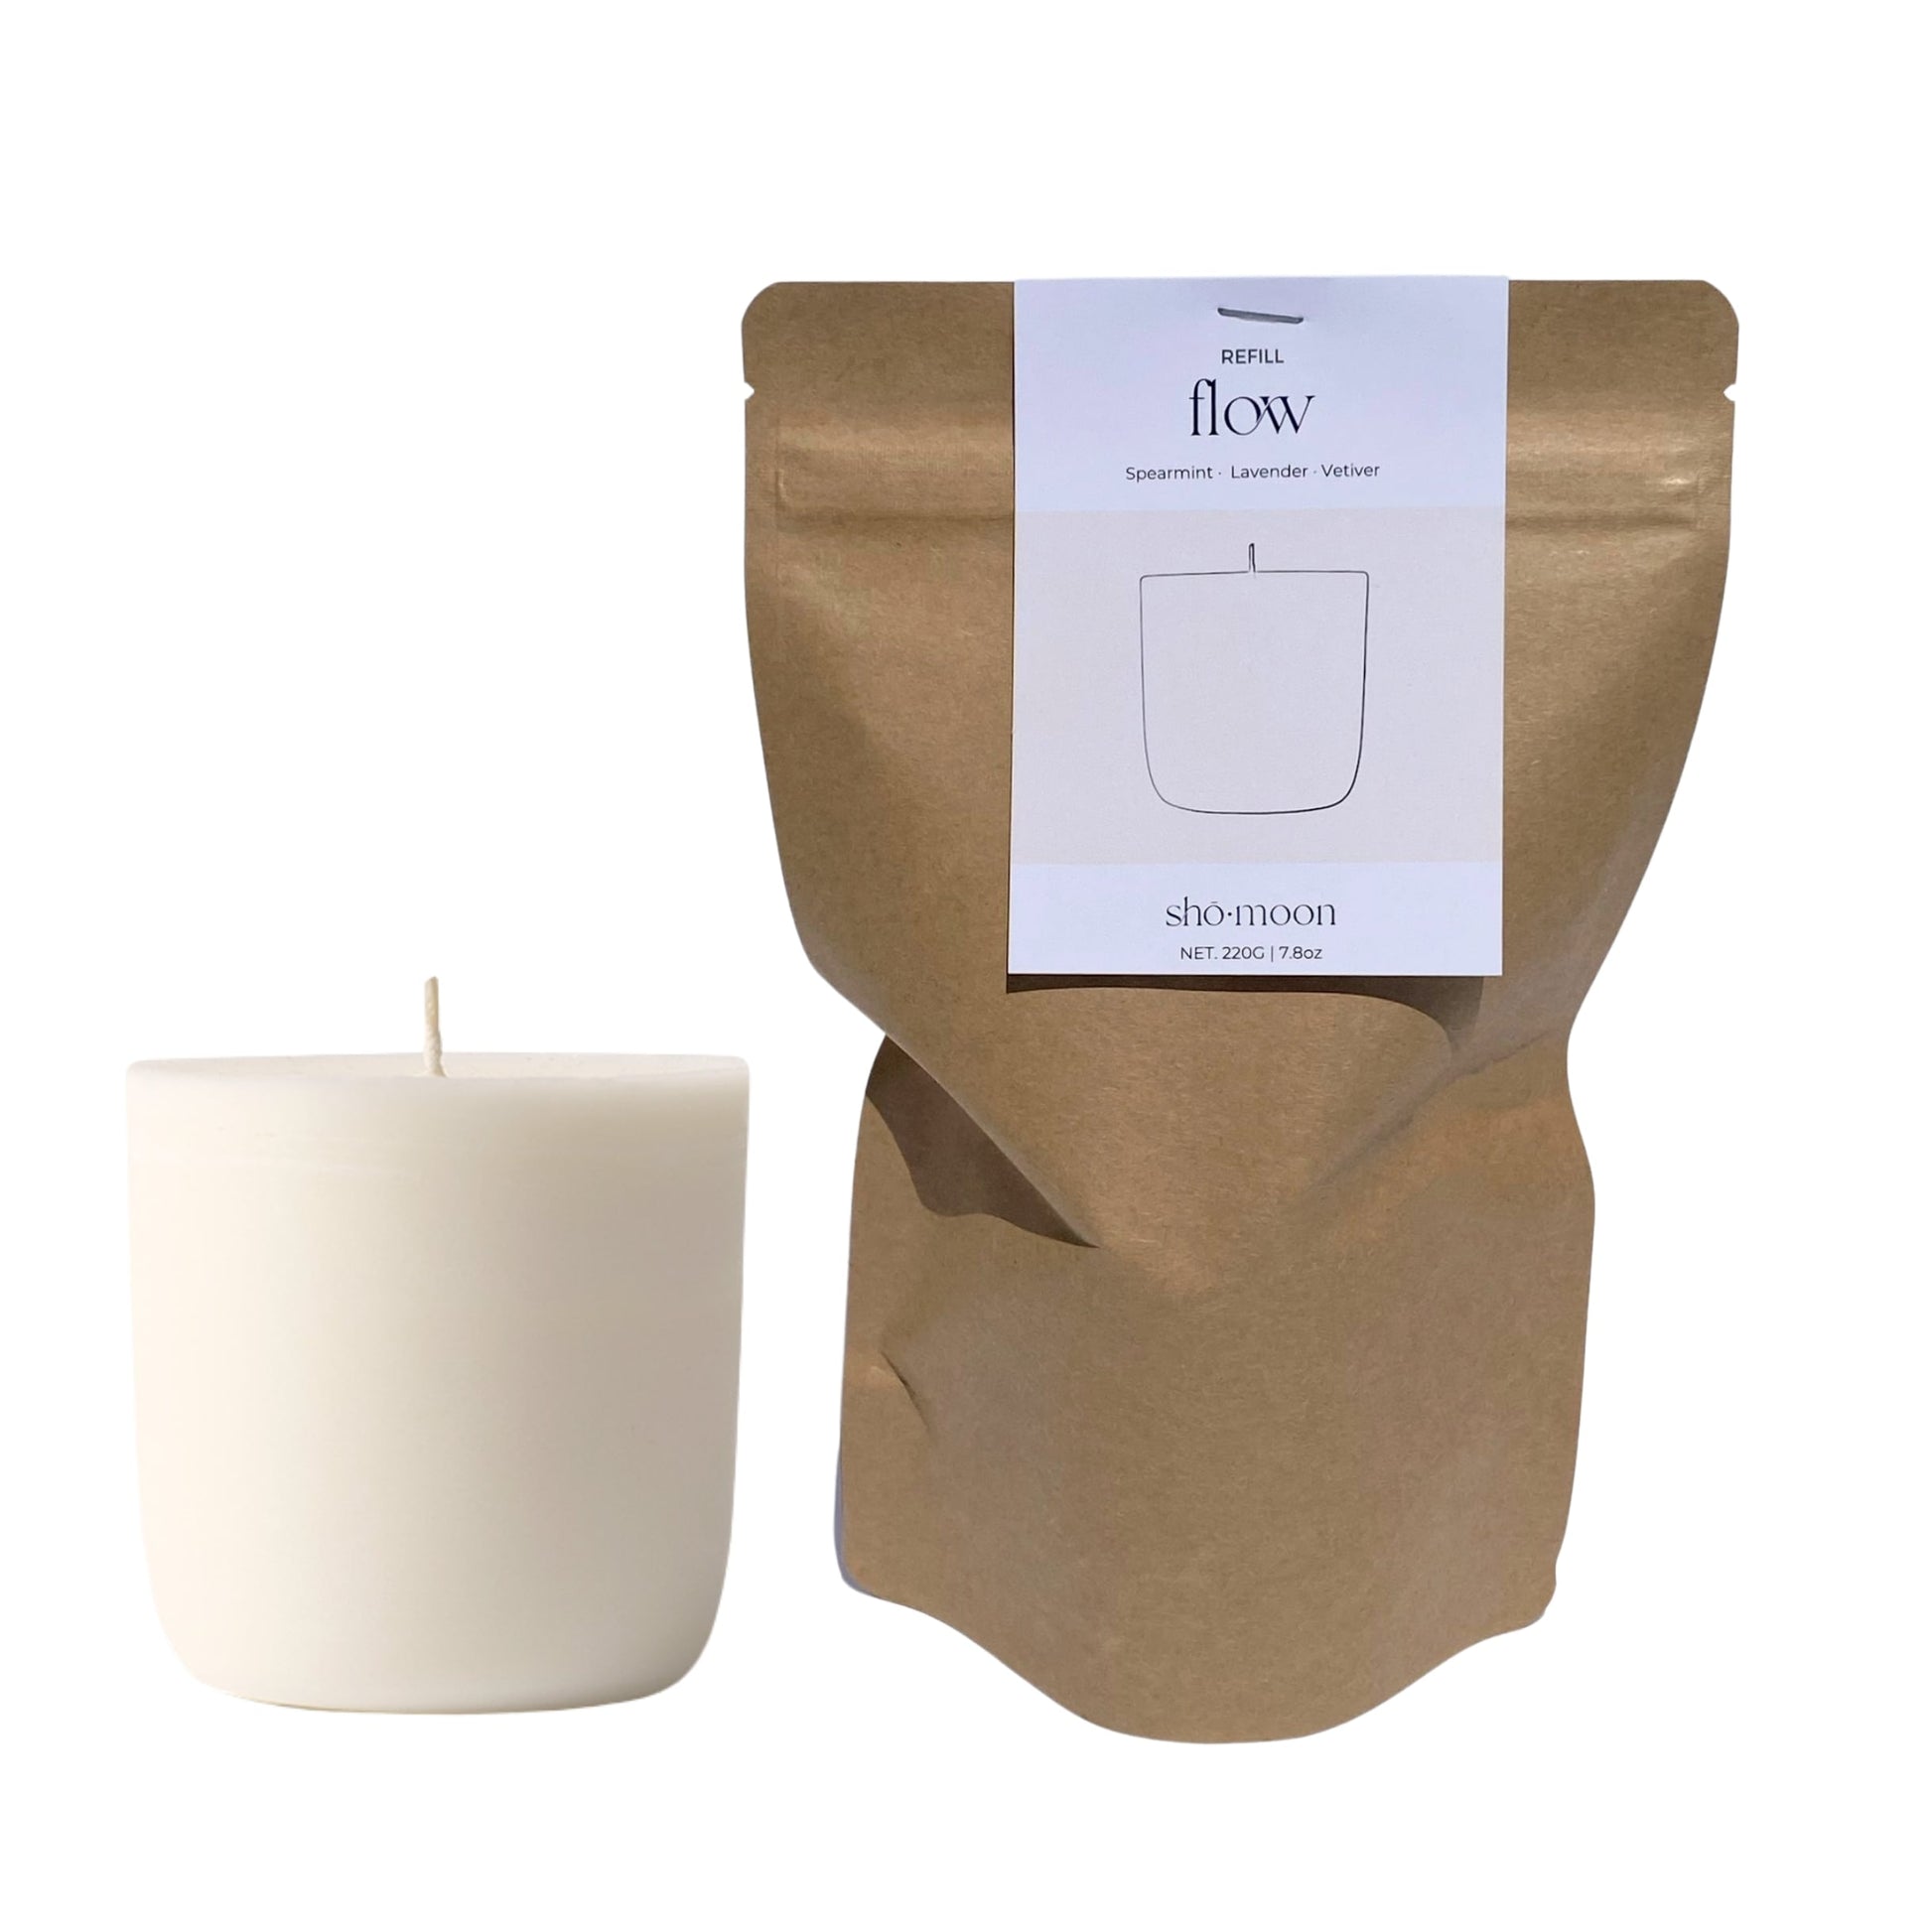 Shō-moon Flow Meditation Candle Refill with pure essentials oils and clean burning and natural wax and packaging